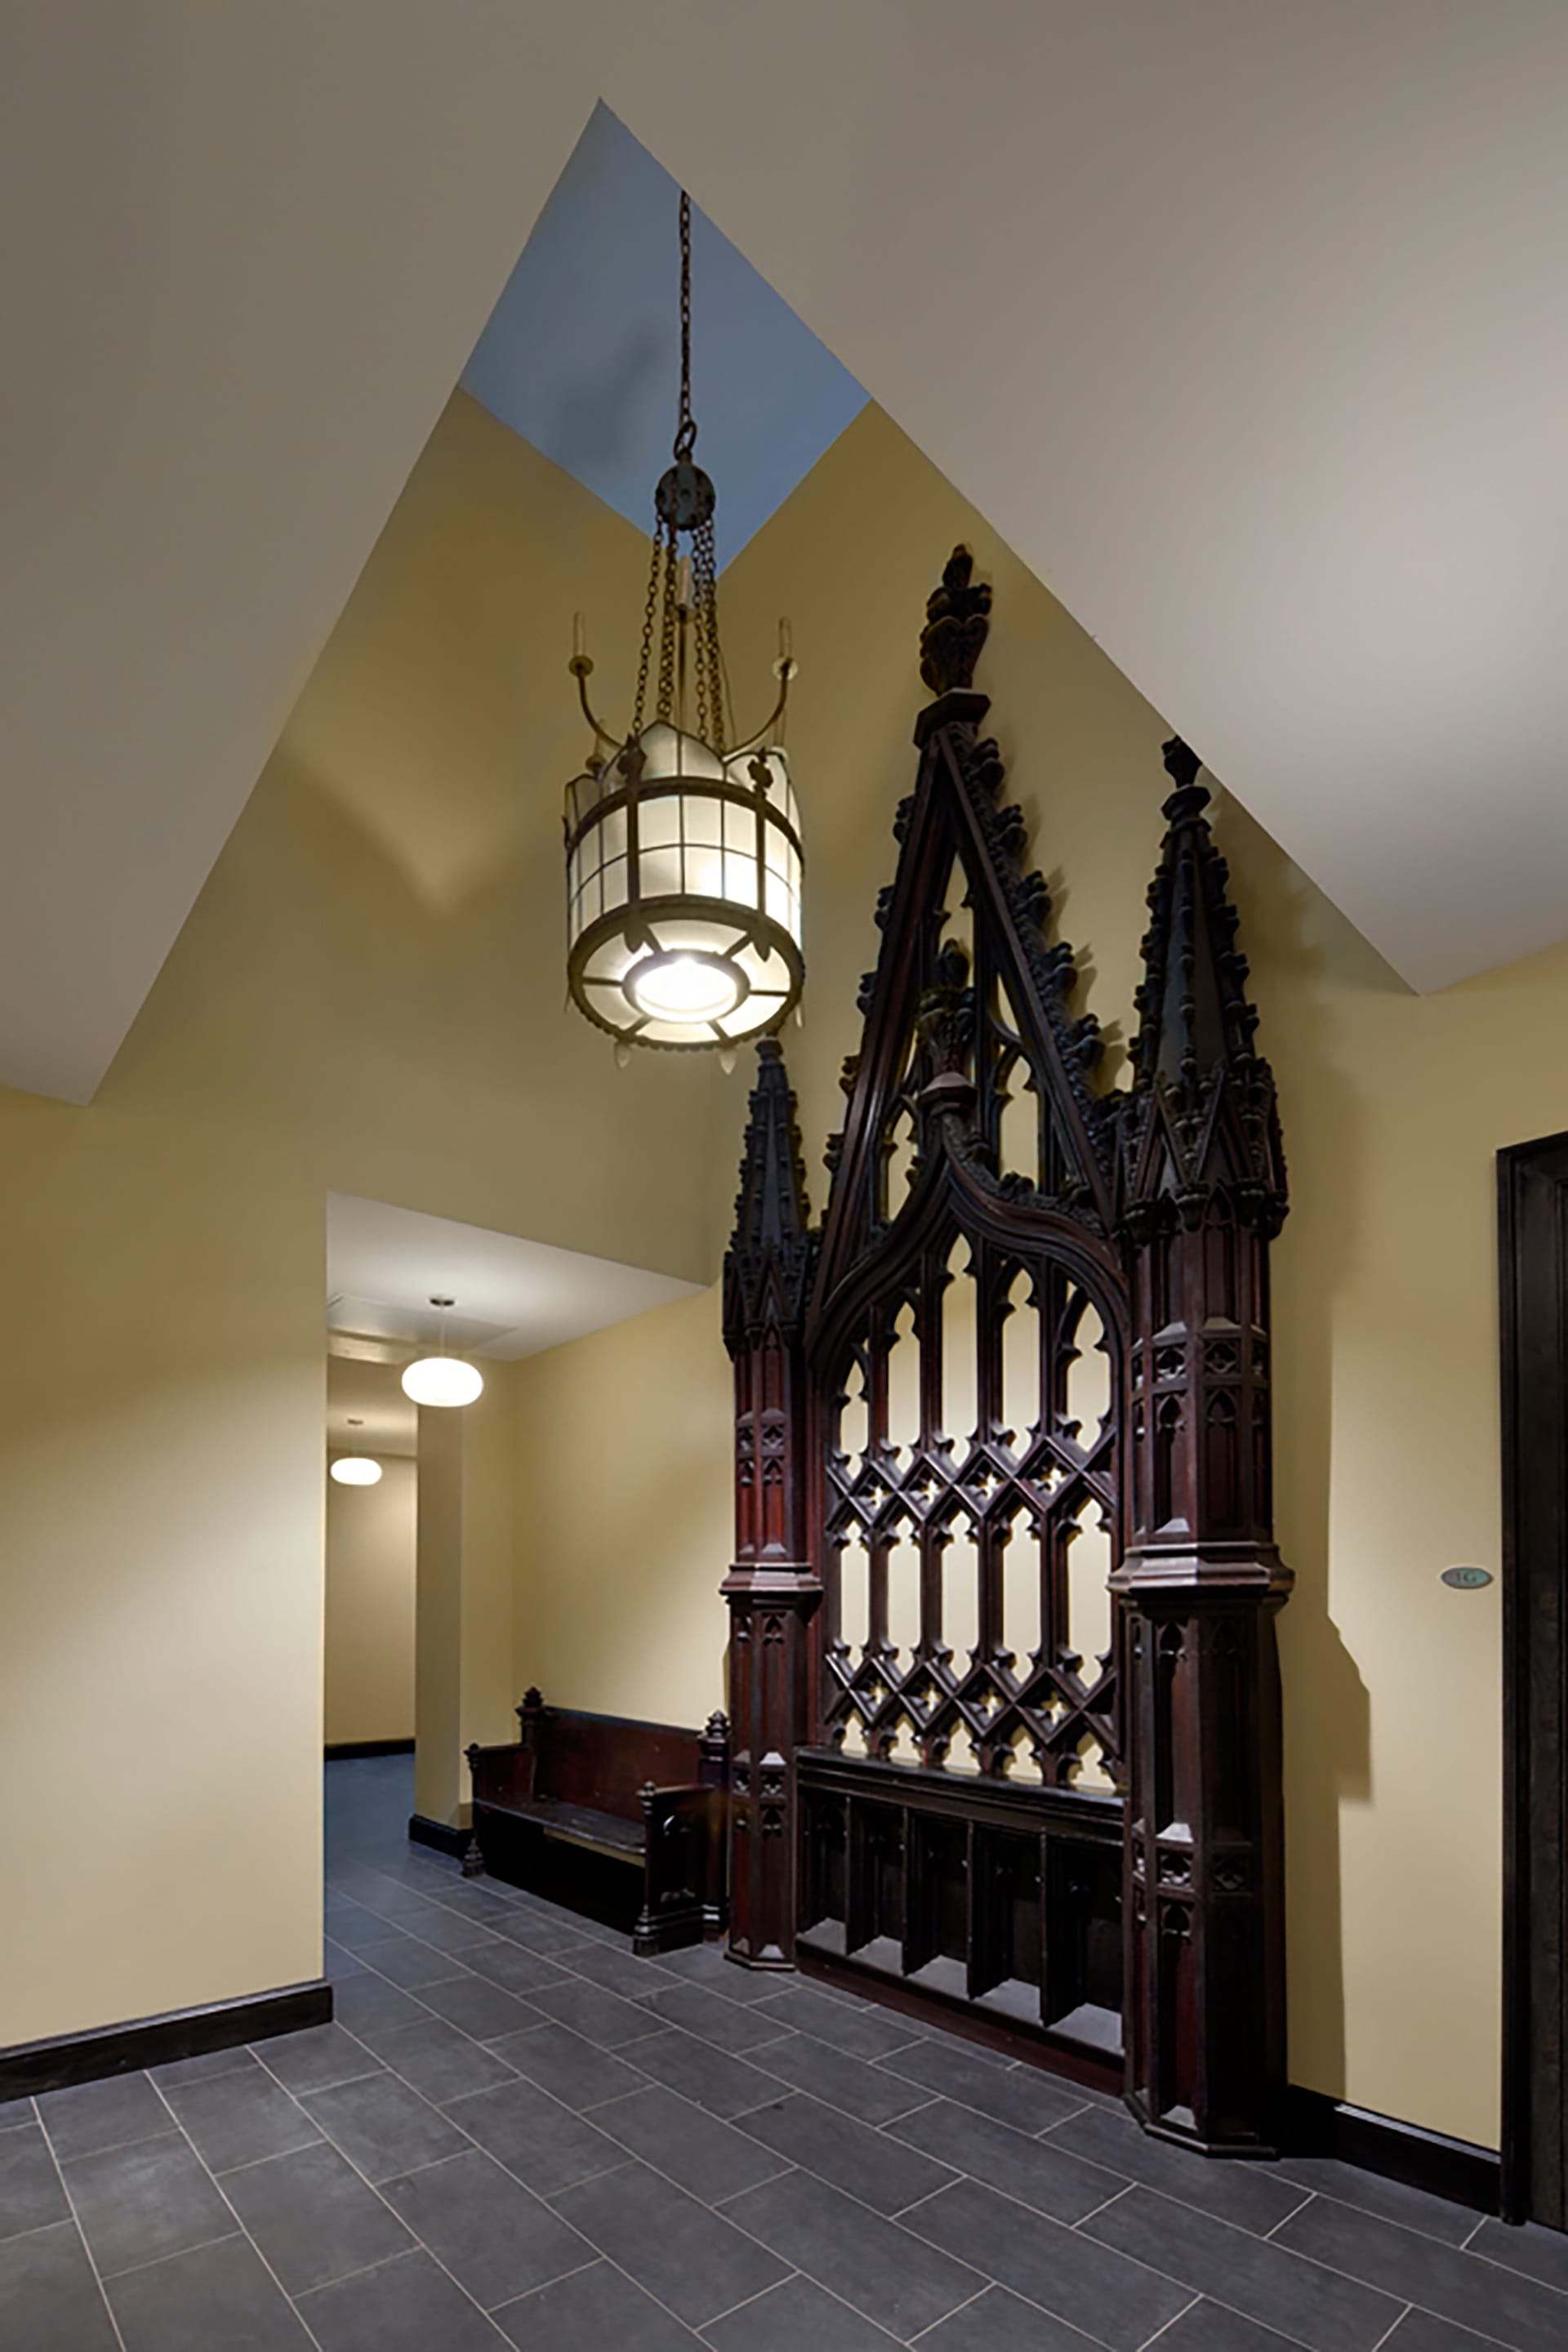 Hallway with preserved woodworking from the building's previous life as a church